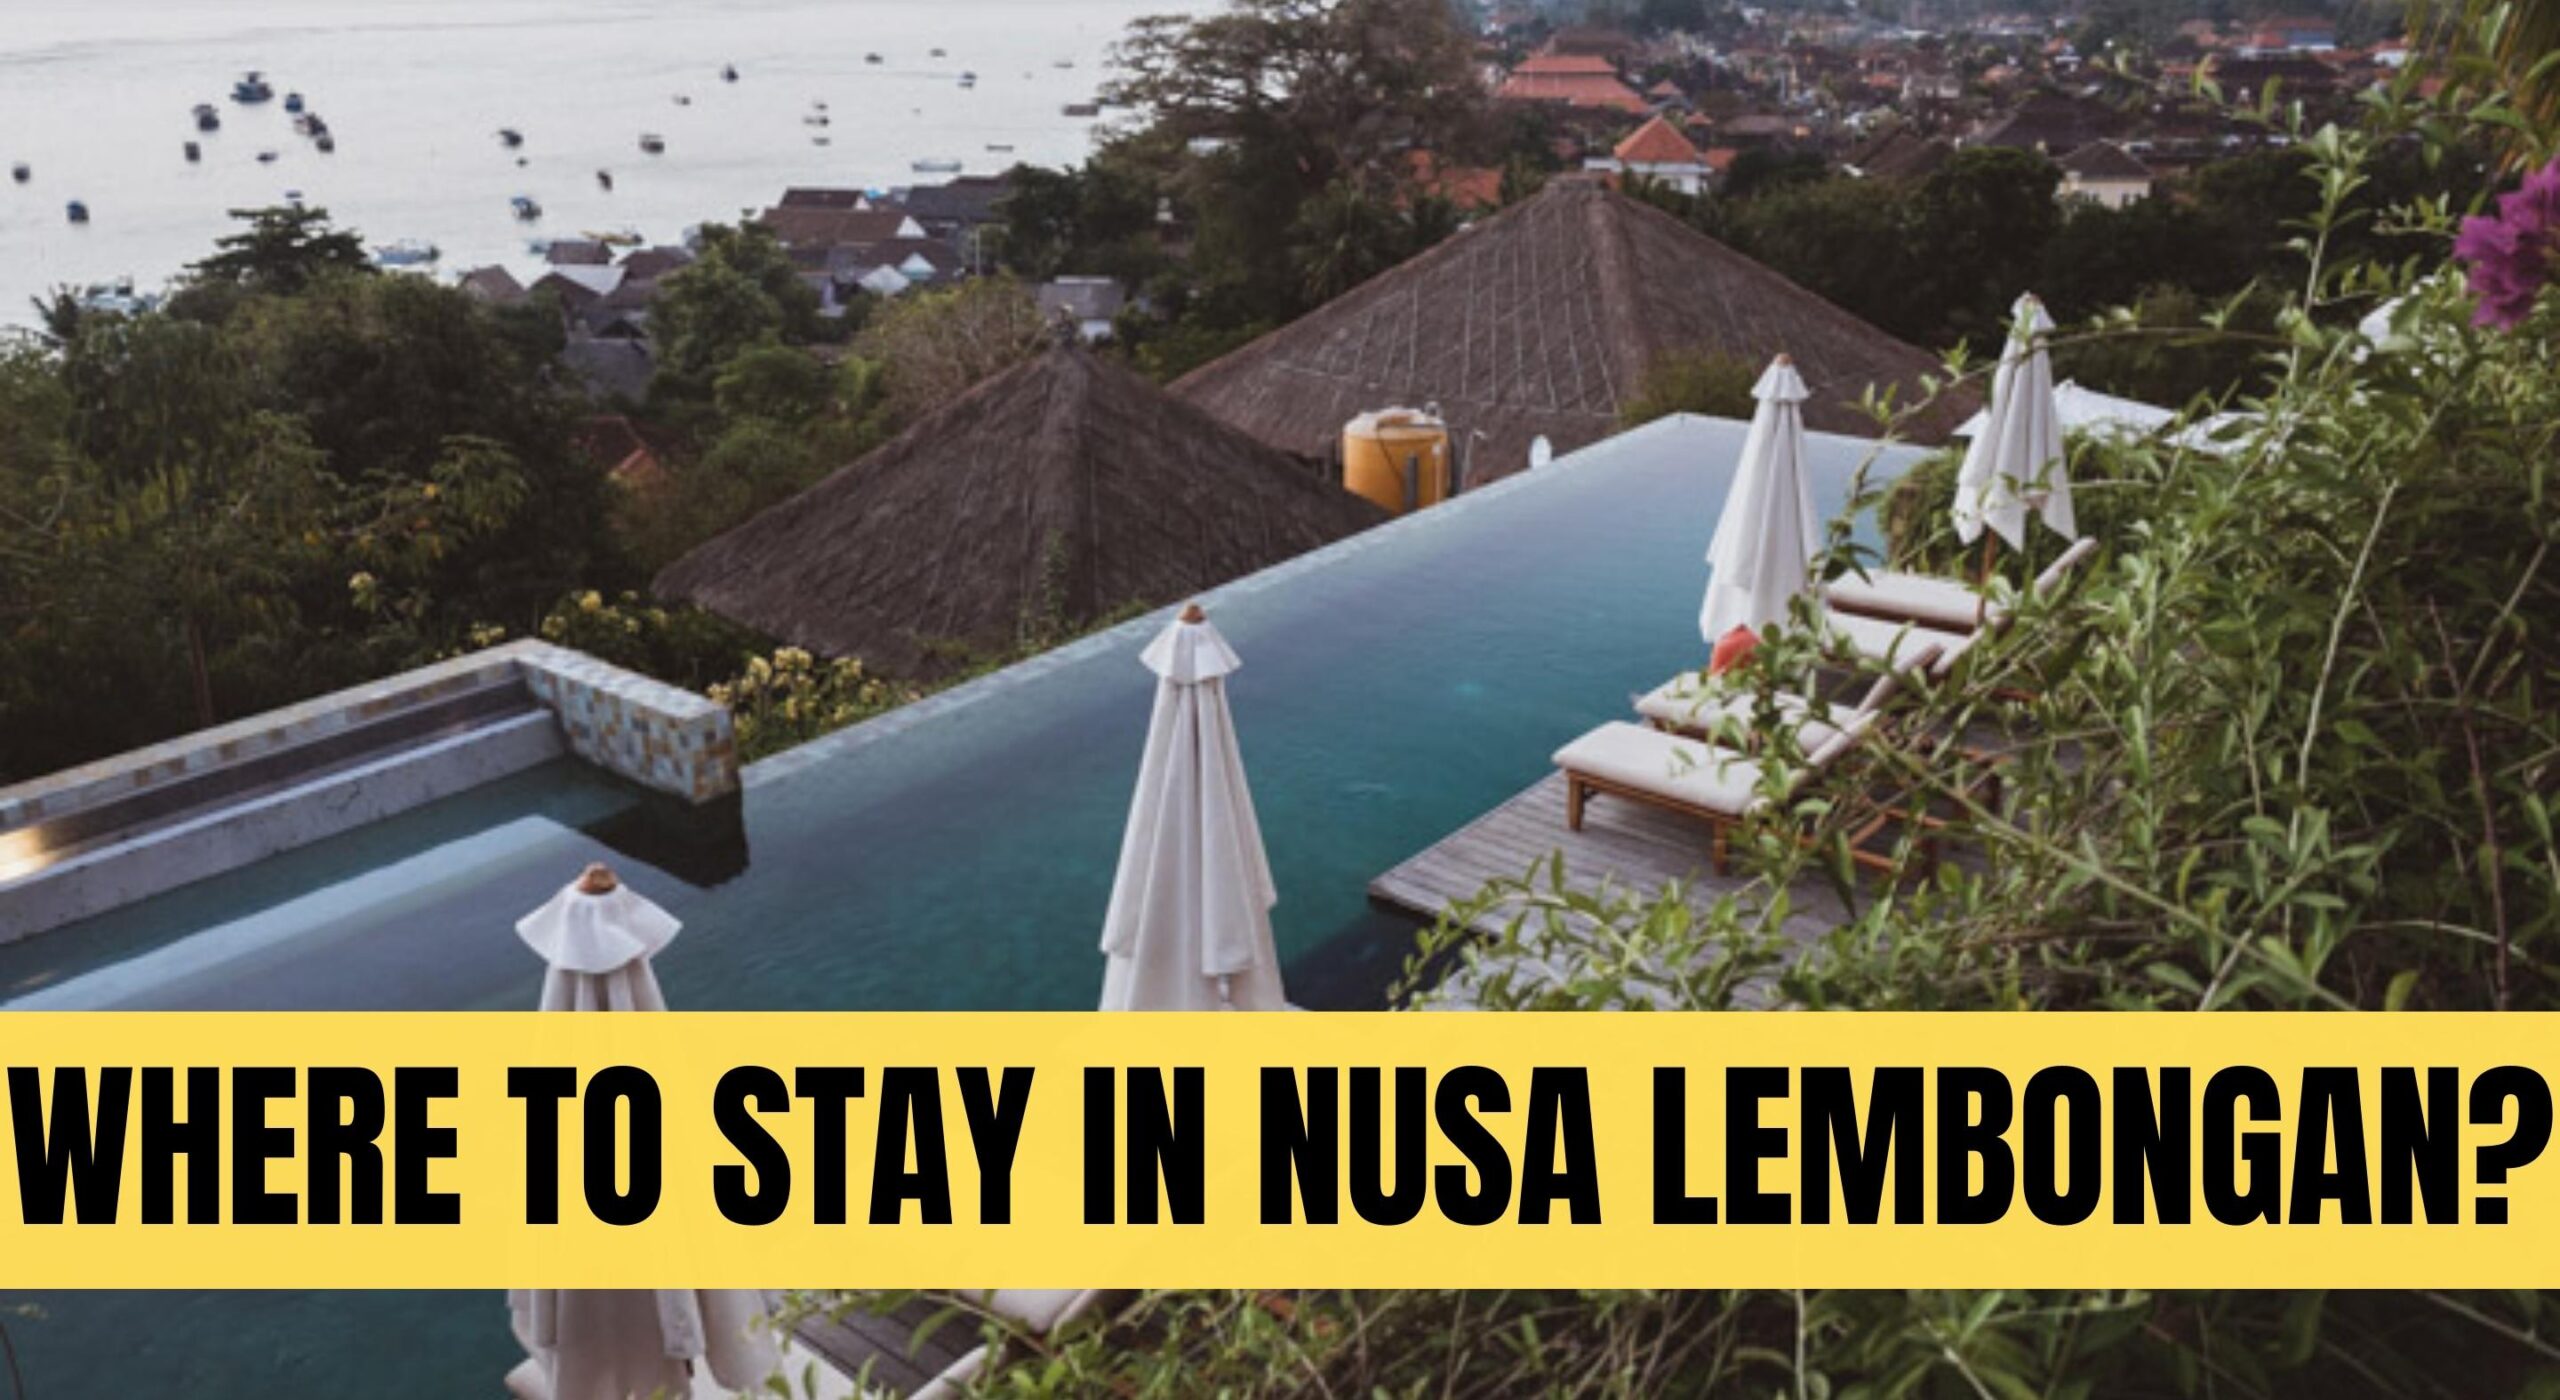 Where To Stay In Nusa Lembongan?